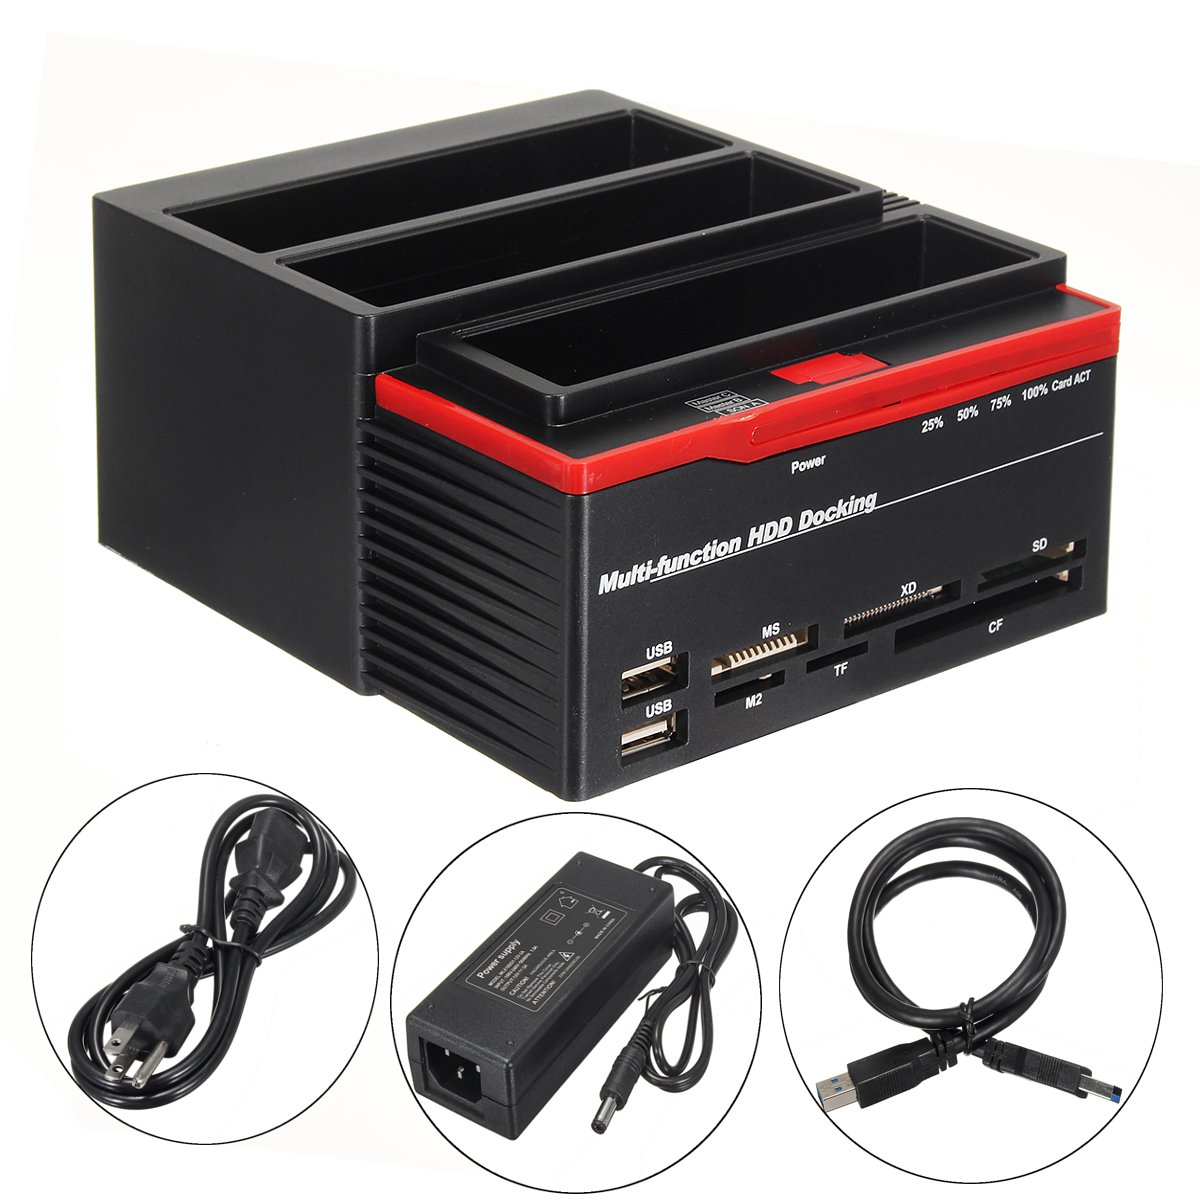 

US 2.5"3.5" ALL In One USB3.0 To SATA IDE HDD SSD Hard Drive Enclosure Offline Clone Card Reader Hub